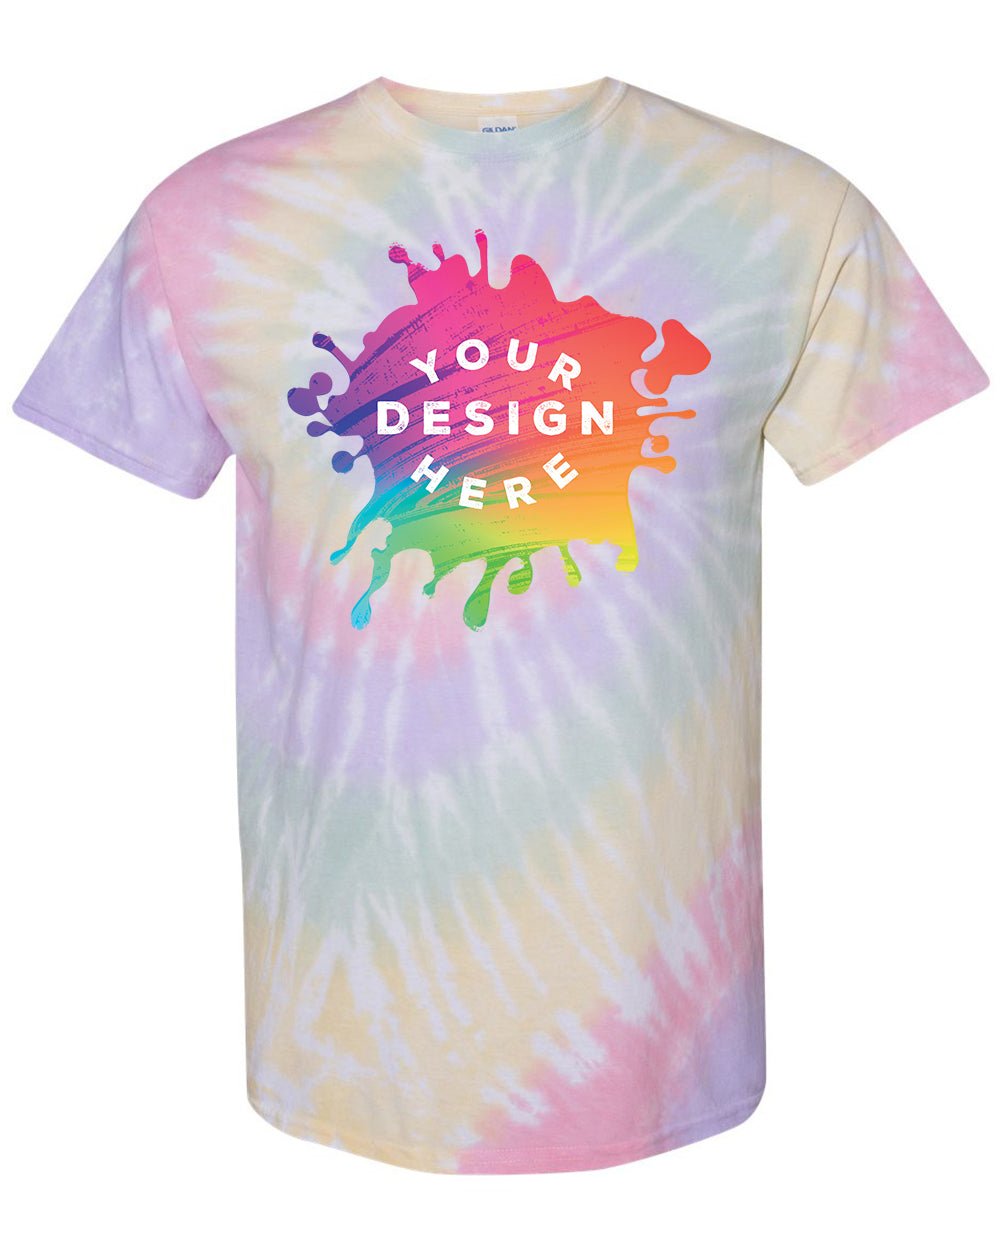 Spiral x Black Tie Dye Short Sleeve T-Shirt (9 Color Options) – The Tie Dye  Company